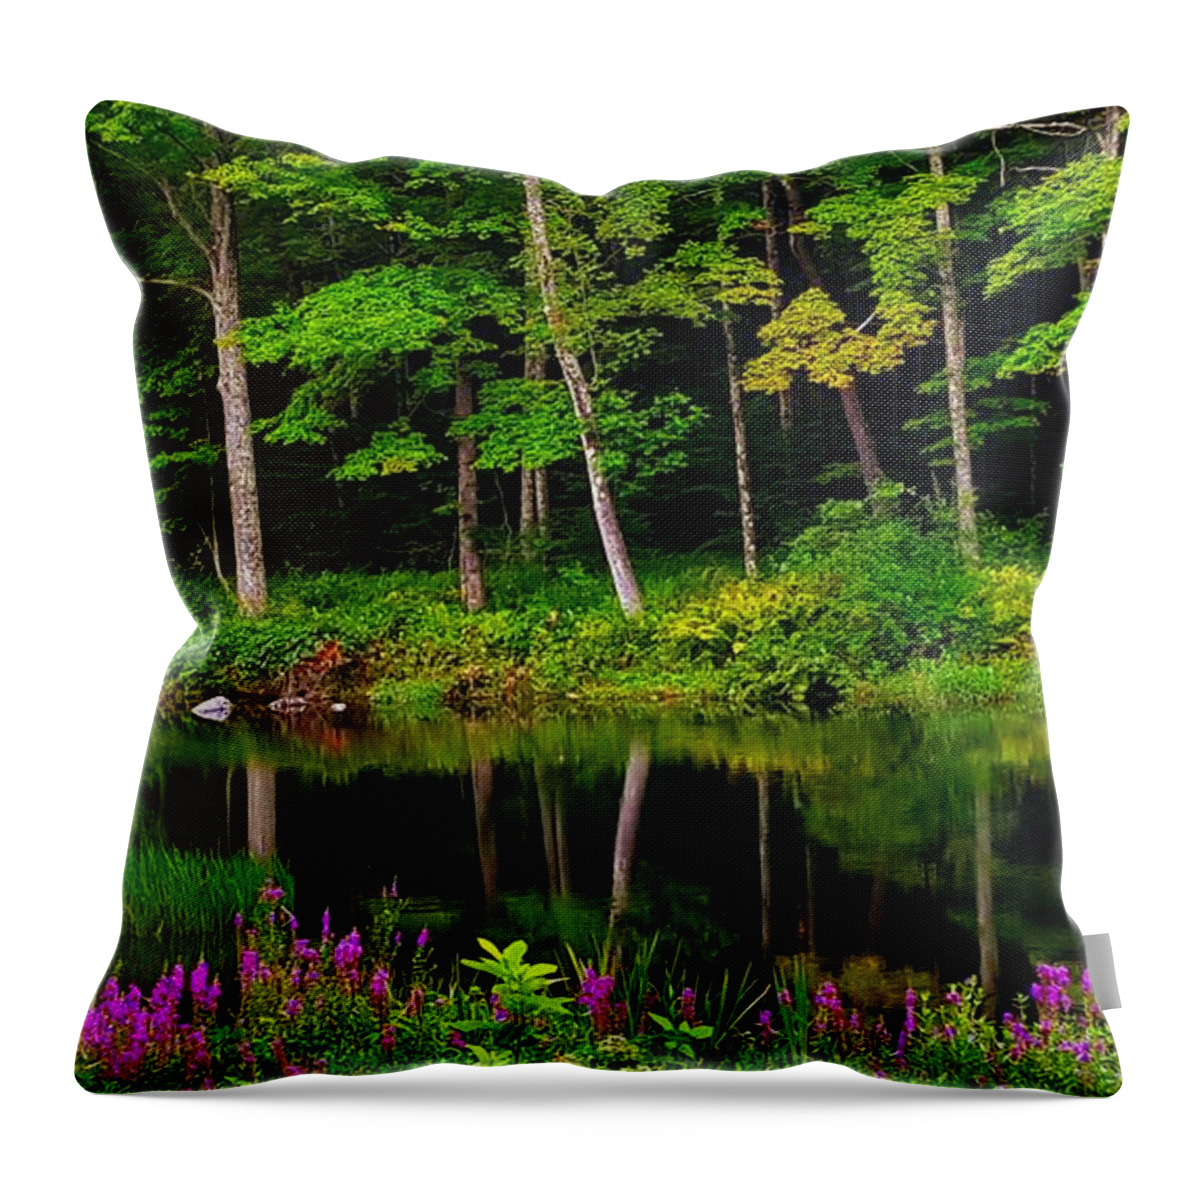 Landscape Throw Pillow featuring the photograph Like A Fairy Tale by Dani McEvoy